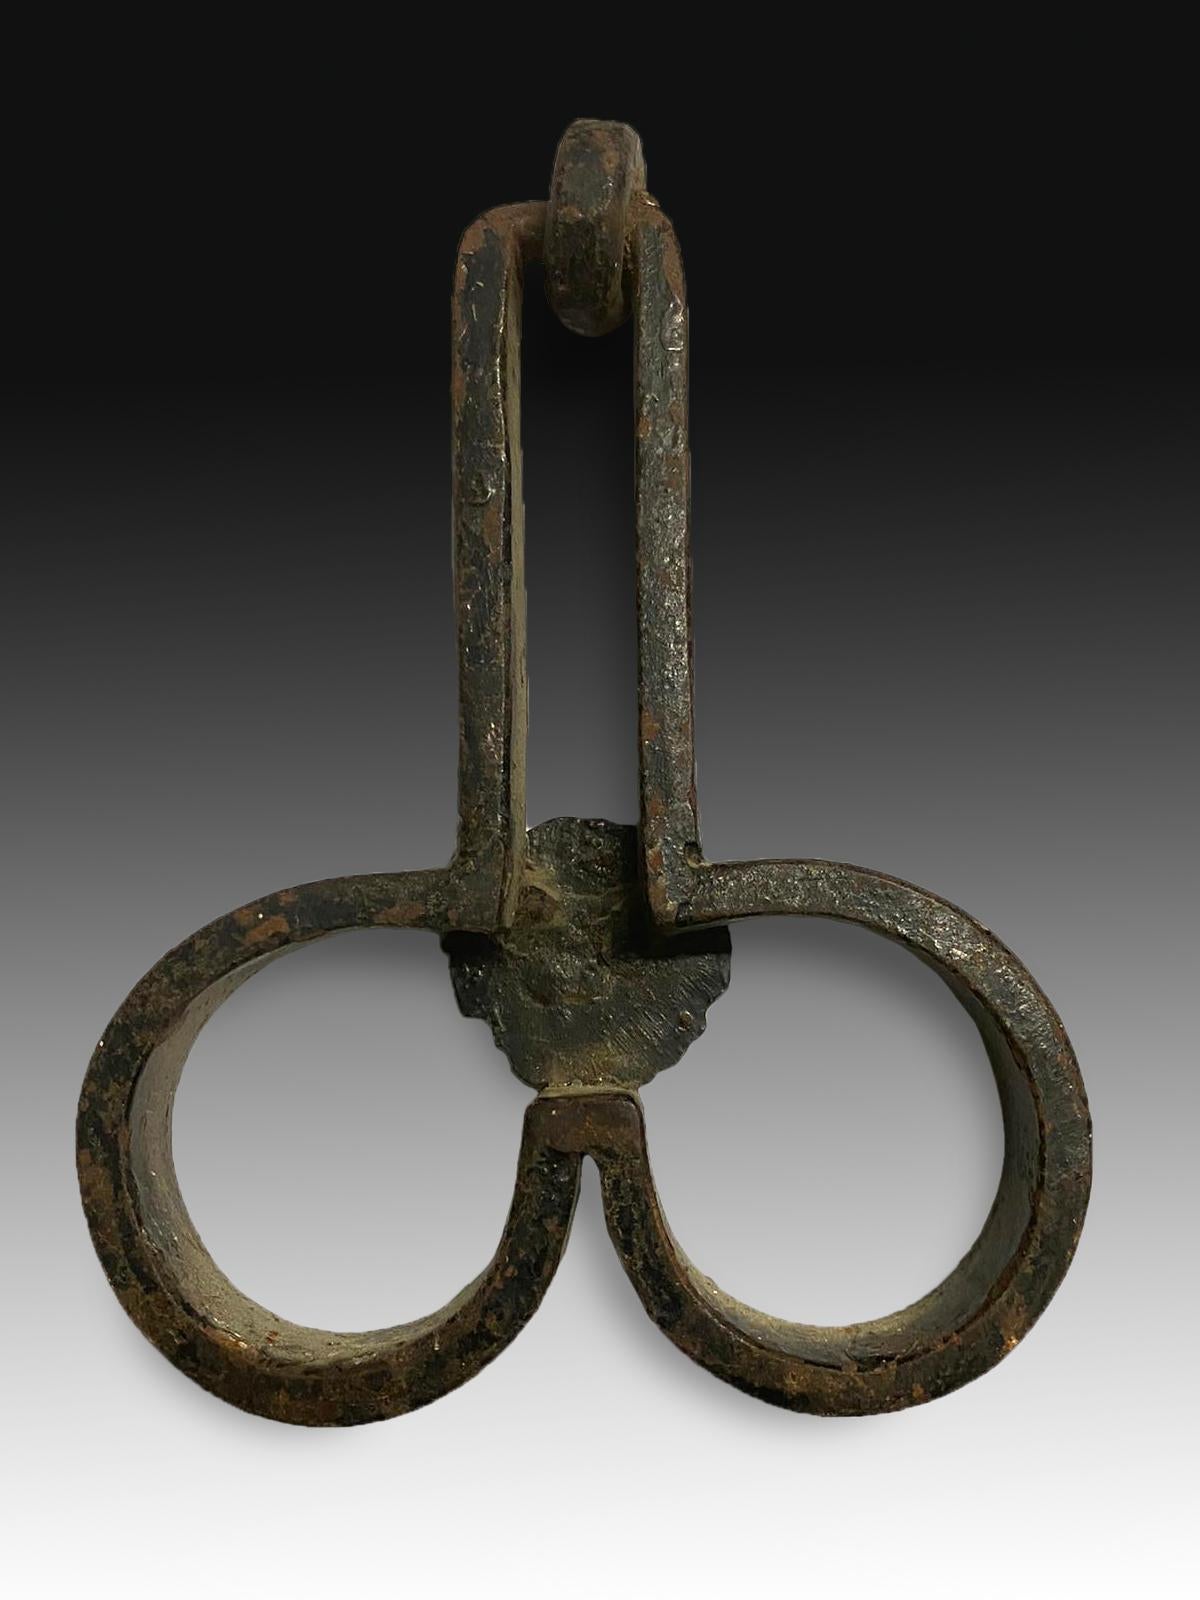 Hand-Crafted Renaissance Wrought Iron Handle, 16th Century